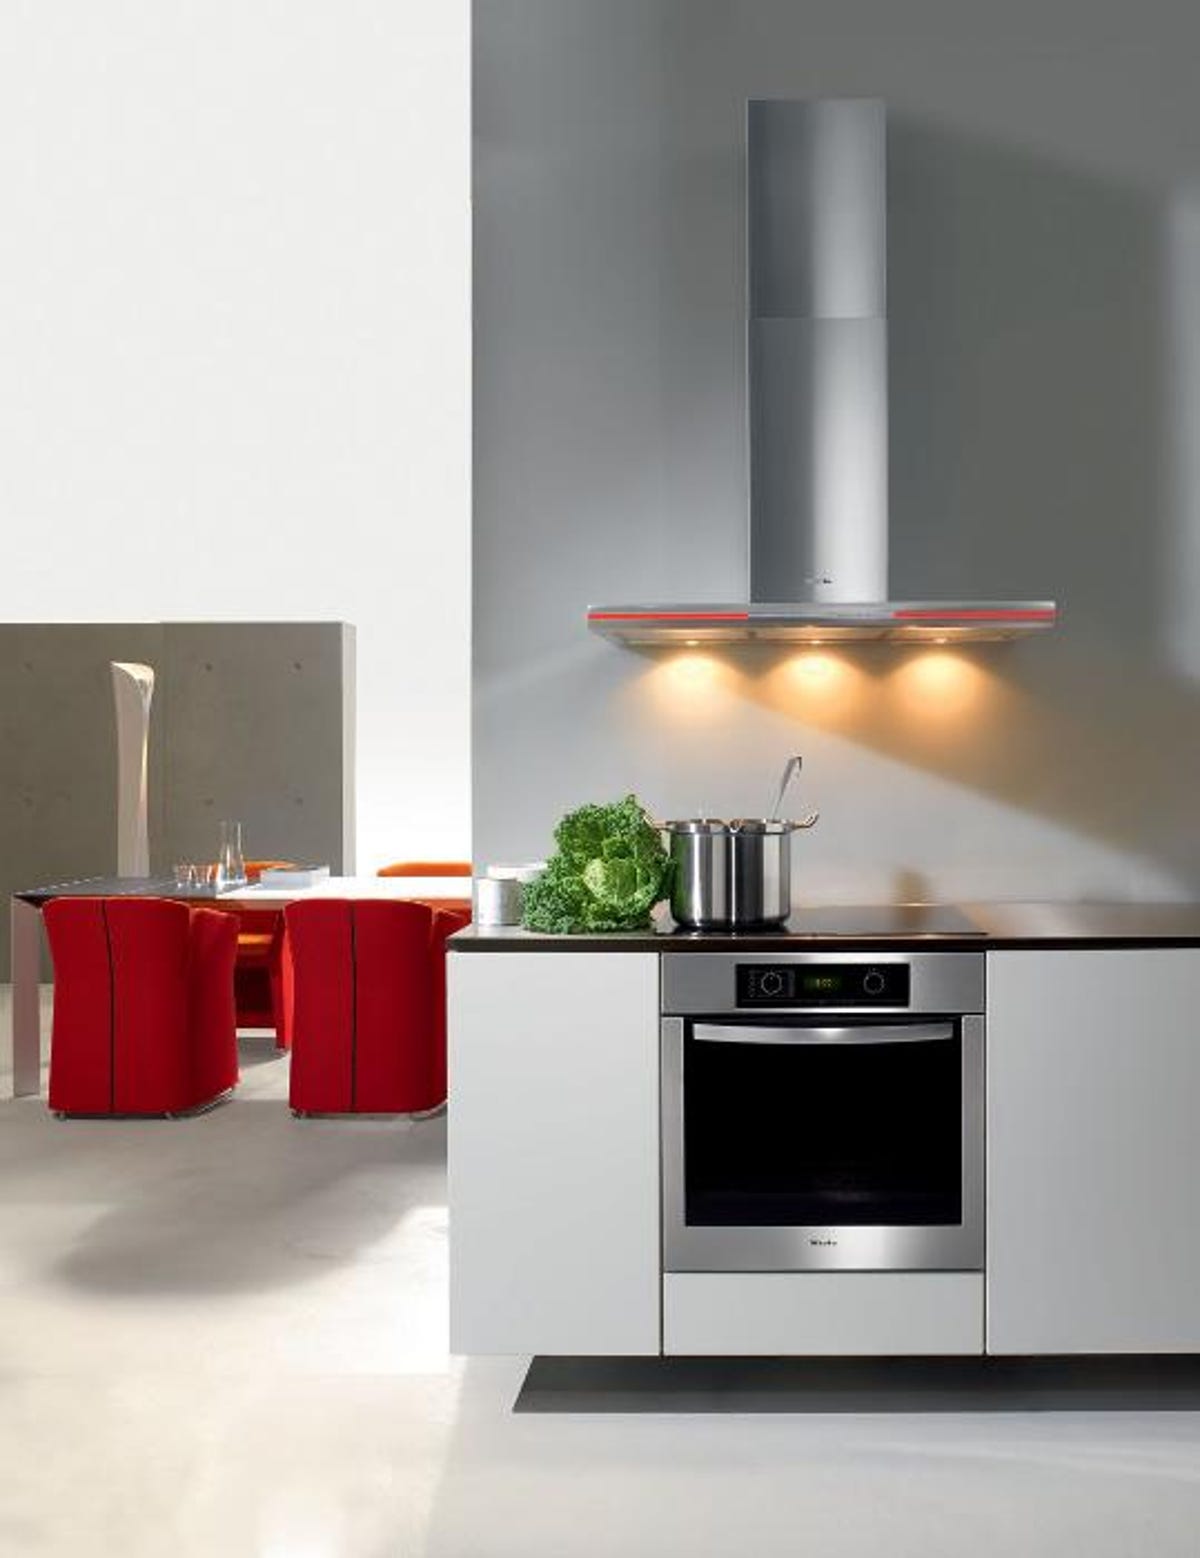 The Miele Lumen range hood with red and blue light